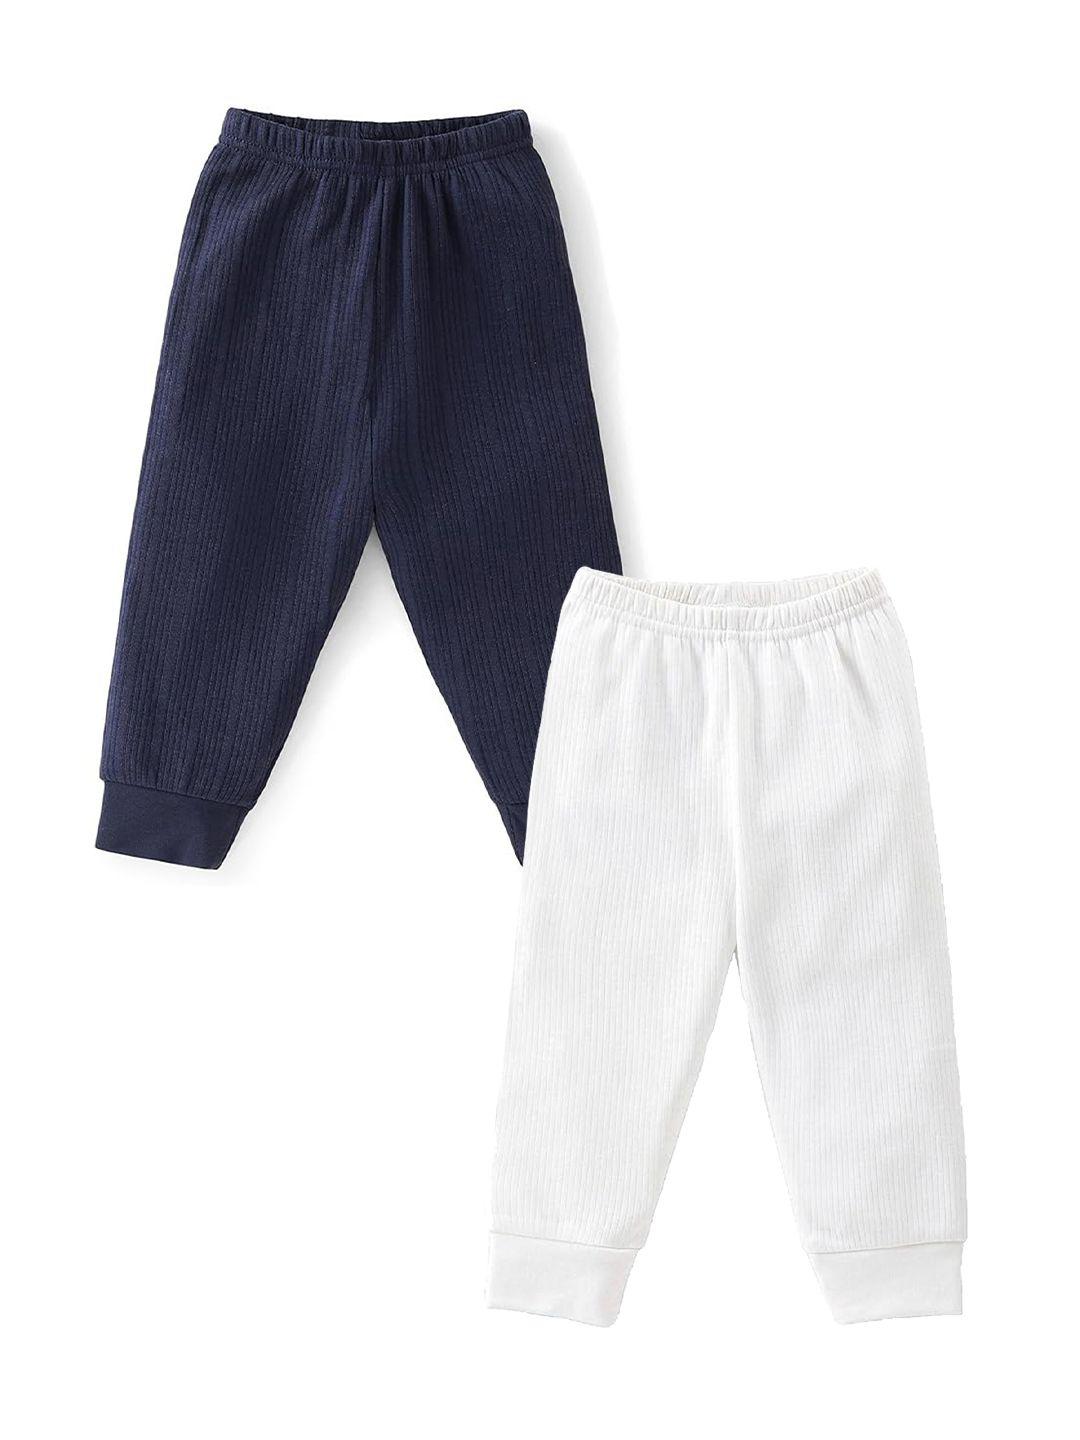 baesd kids pack of 2 cotton wool thermal bottoms